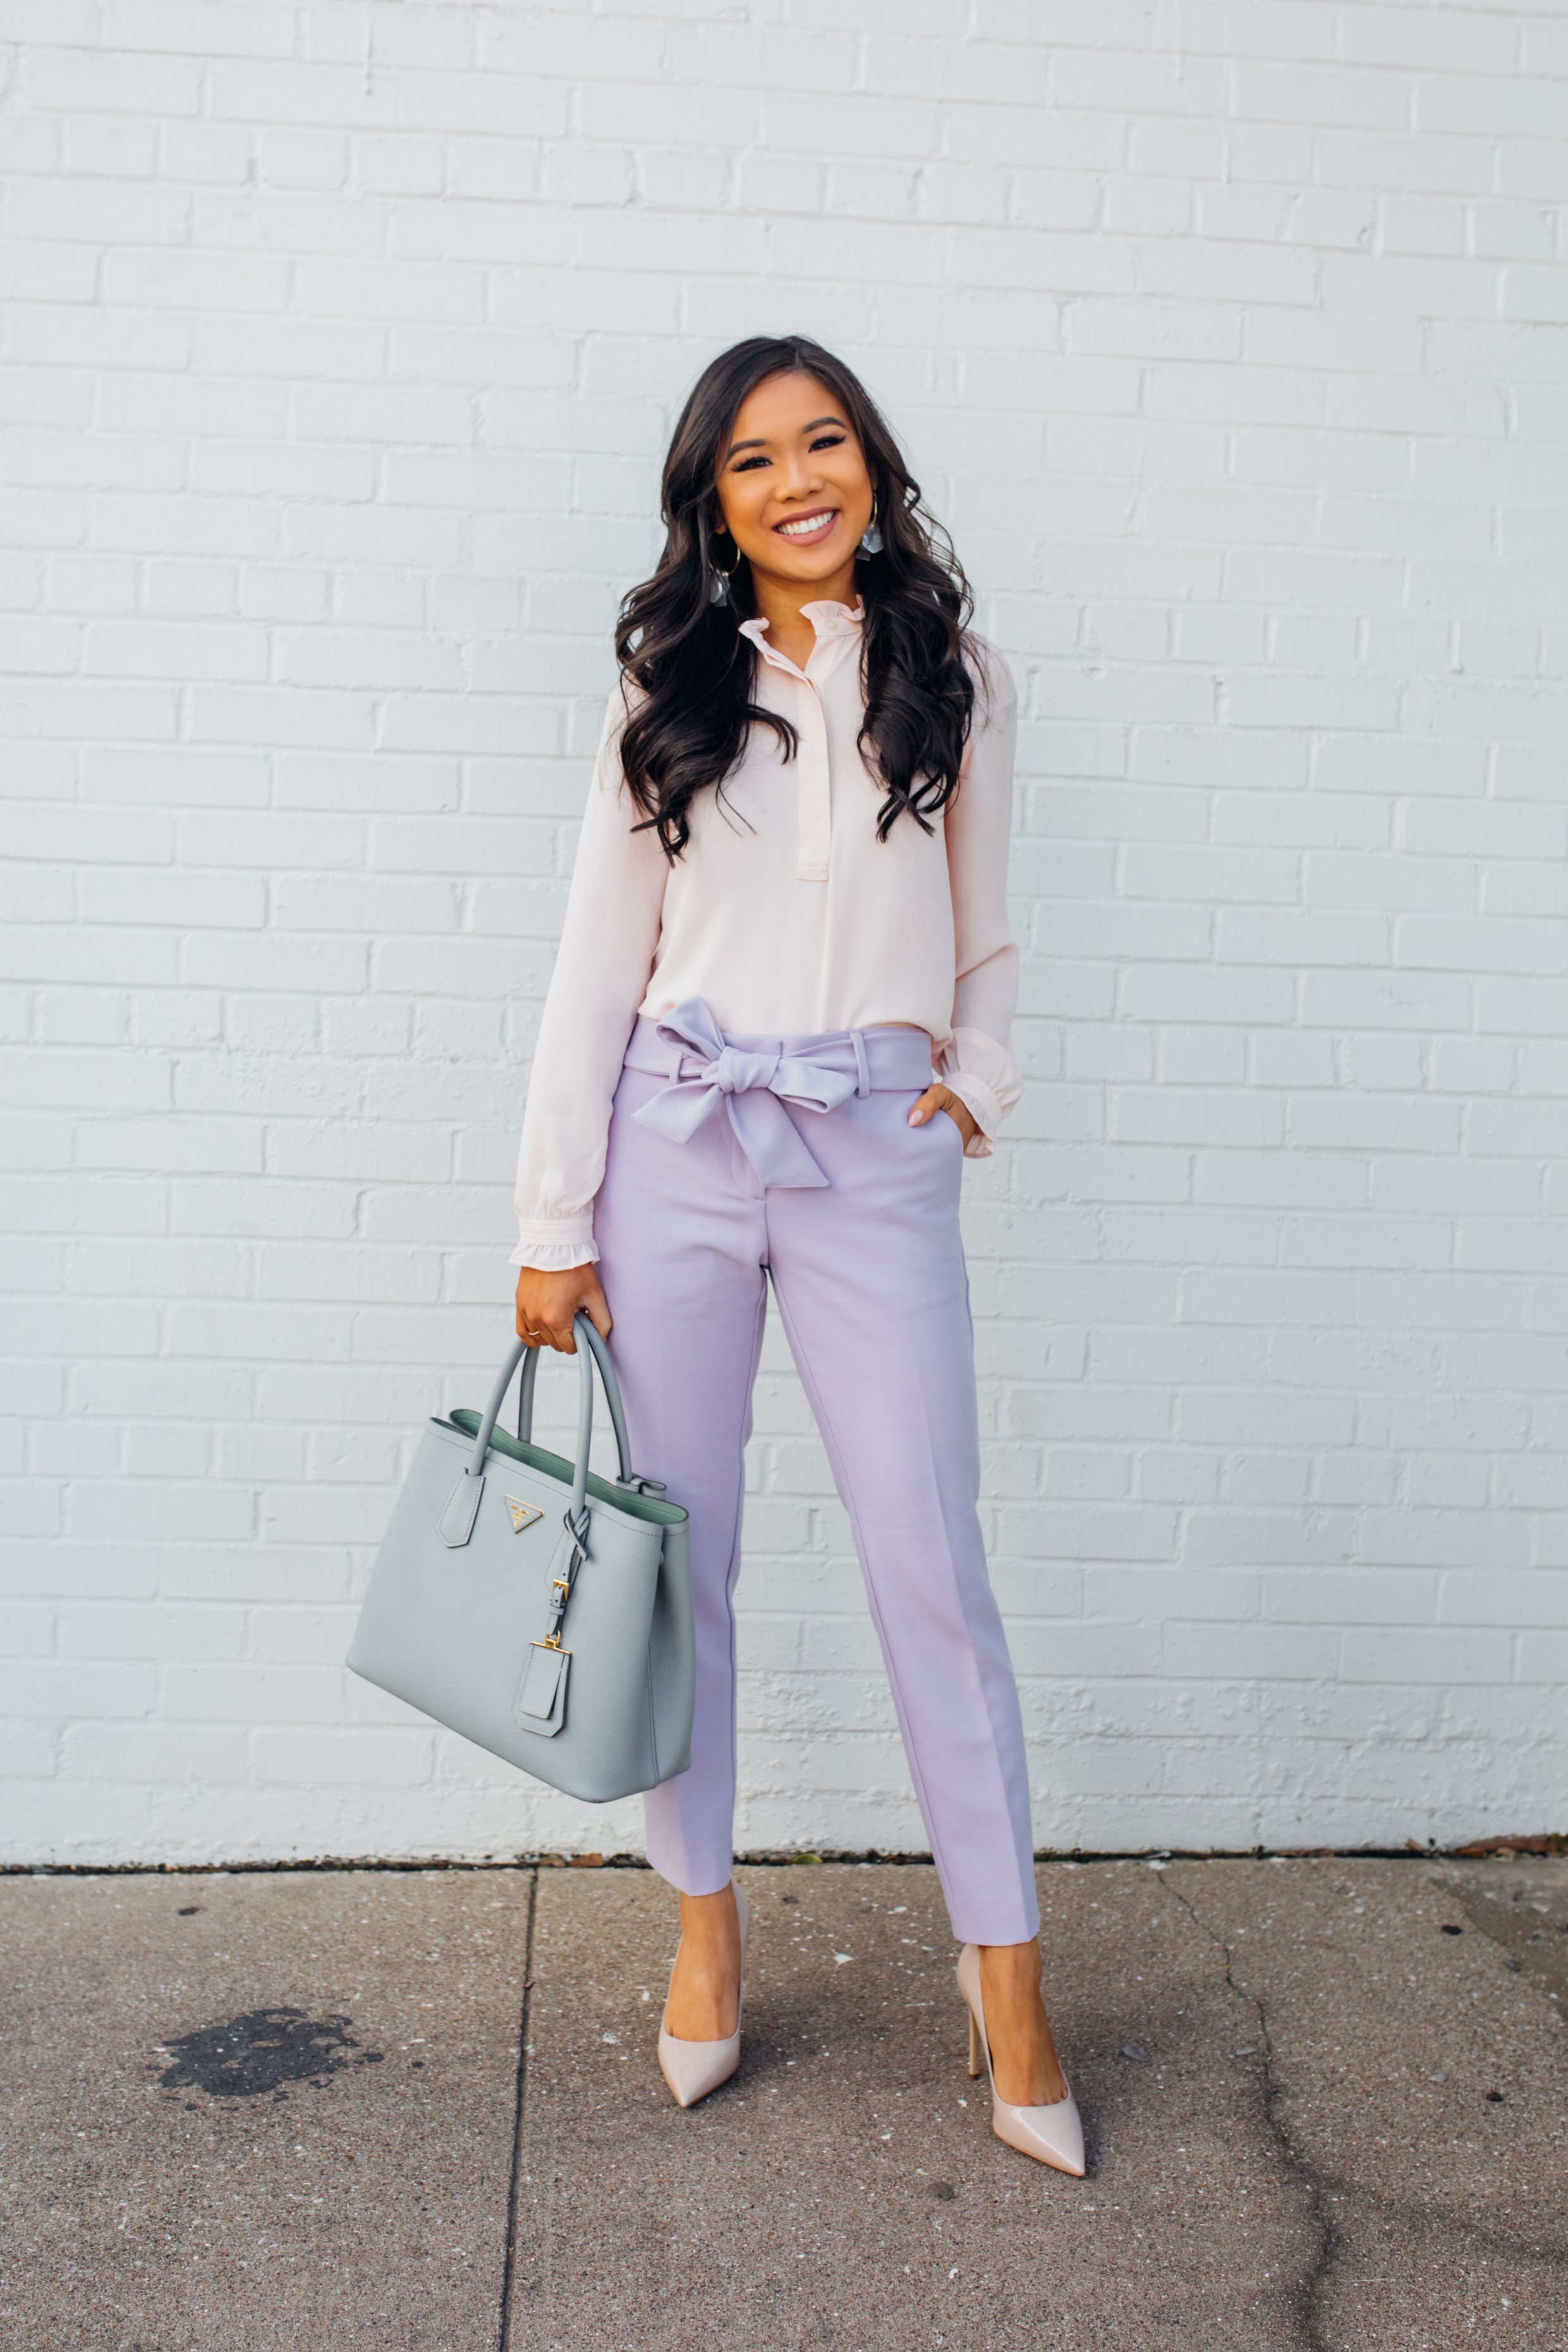 Mint Green Pants - How to Wear Them & Look Stylish!